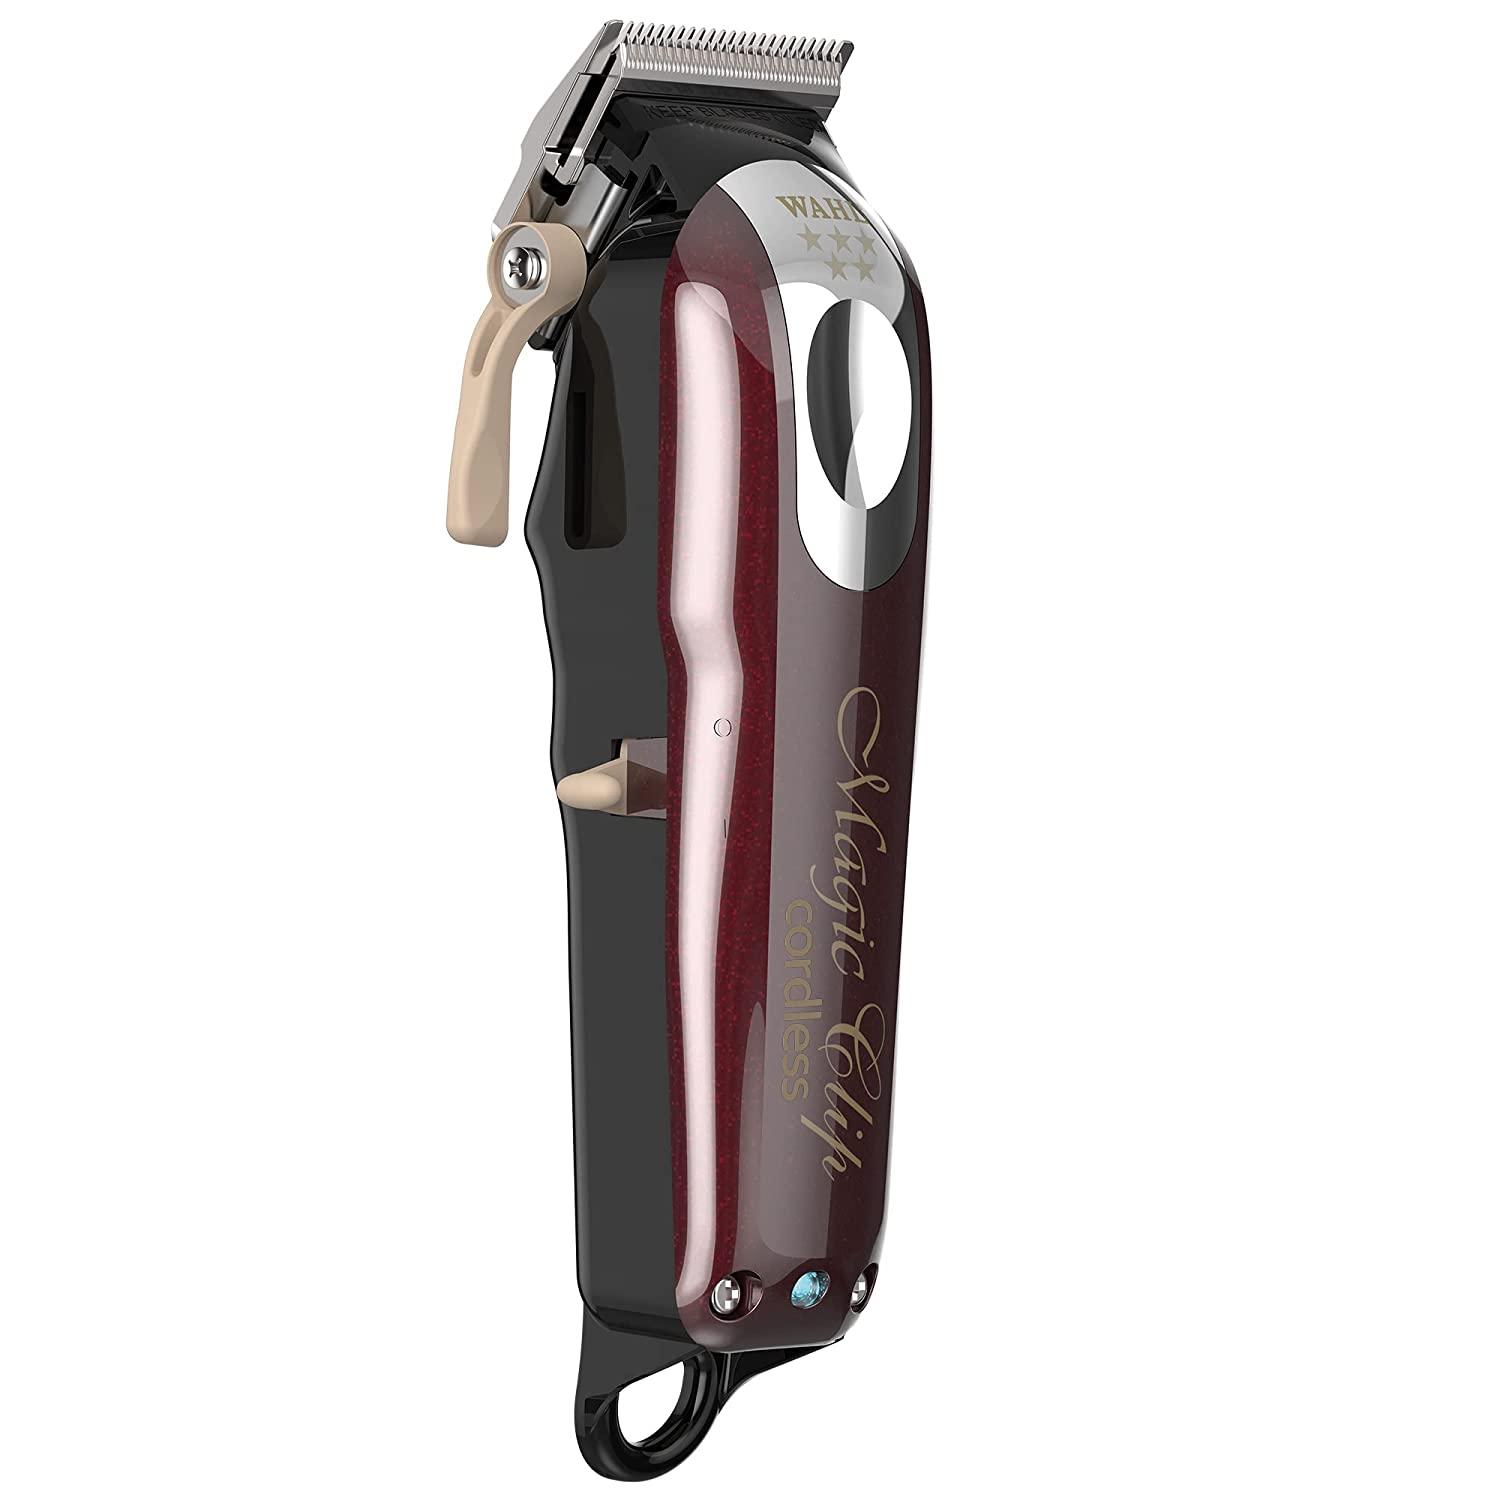 Wahl 5 Star Cordless Magic Clip, Professional Hair Clippers, Pro  Haircutting Kit, Clippers for Blunt Cuts, Adjustable Taper Lever, Crunch  Blade, Cordless, Lightweight, Barbers Supplies